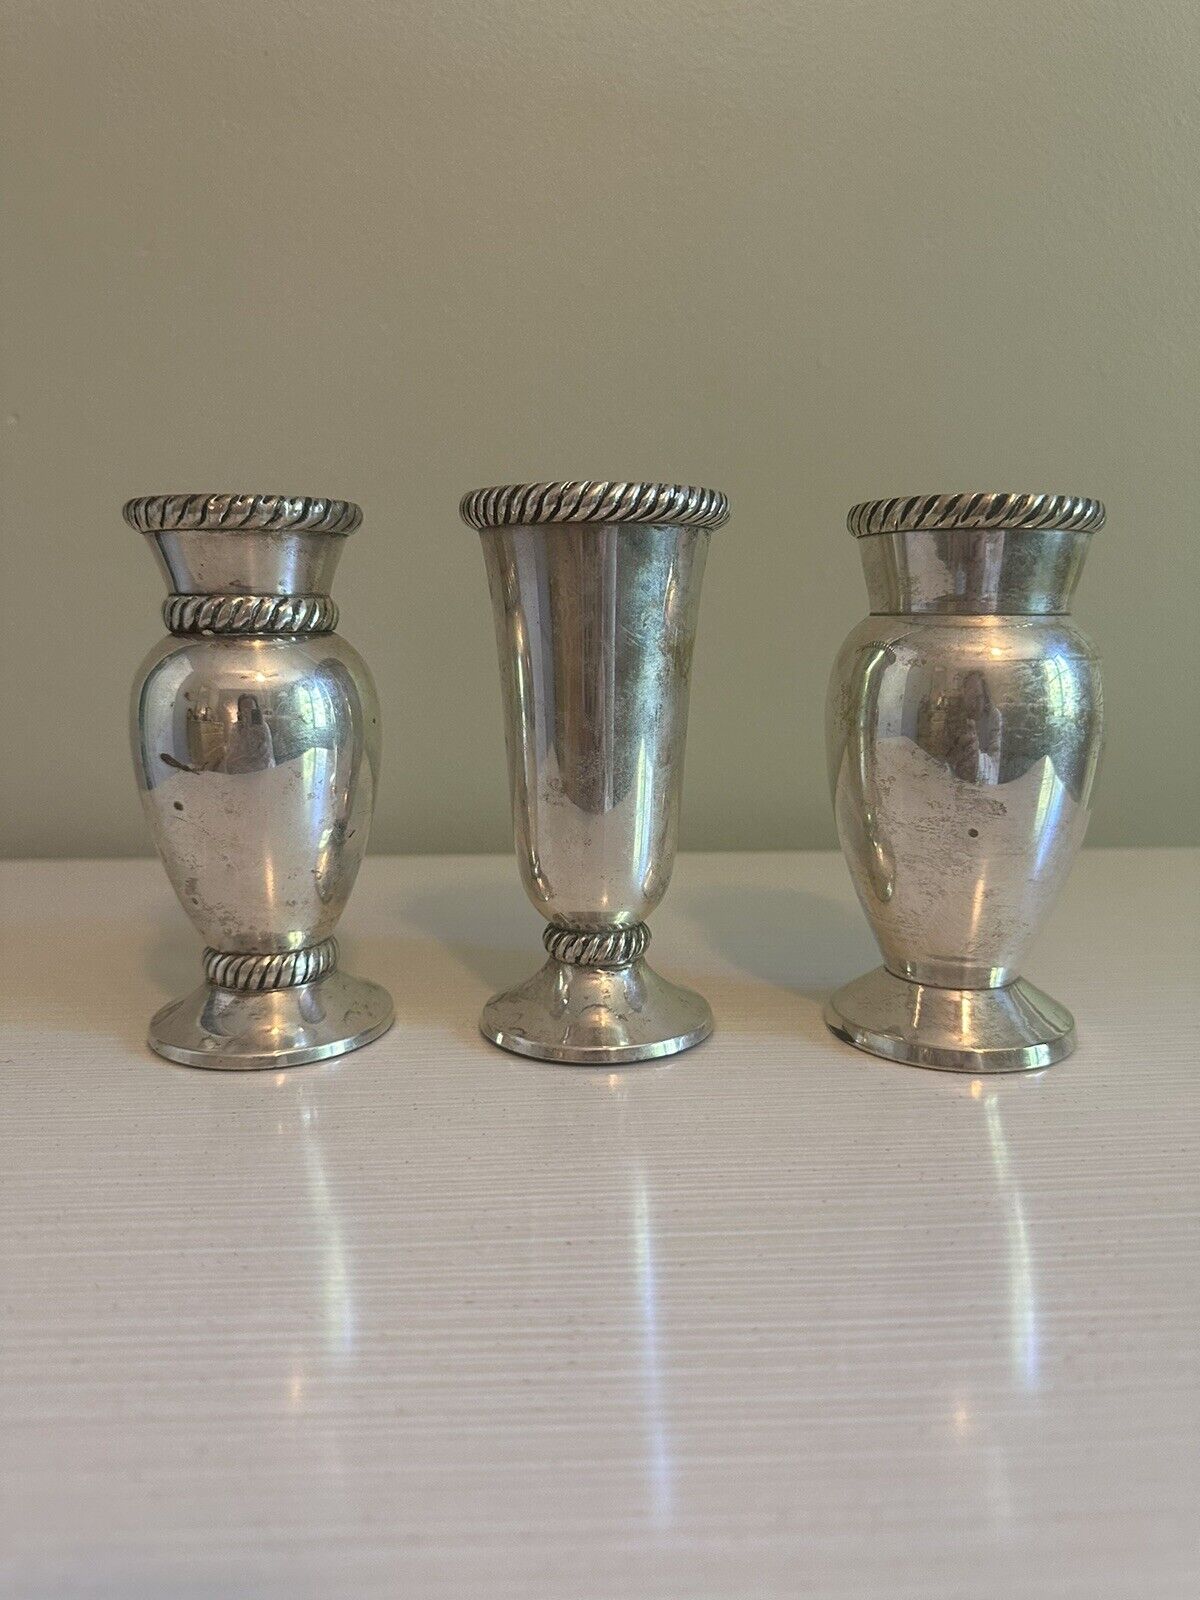 Pottery Barn Antiqued Silver Plated Twist Weighted Bud Vases Set Of Three